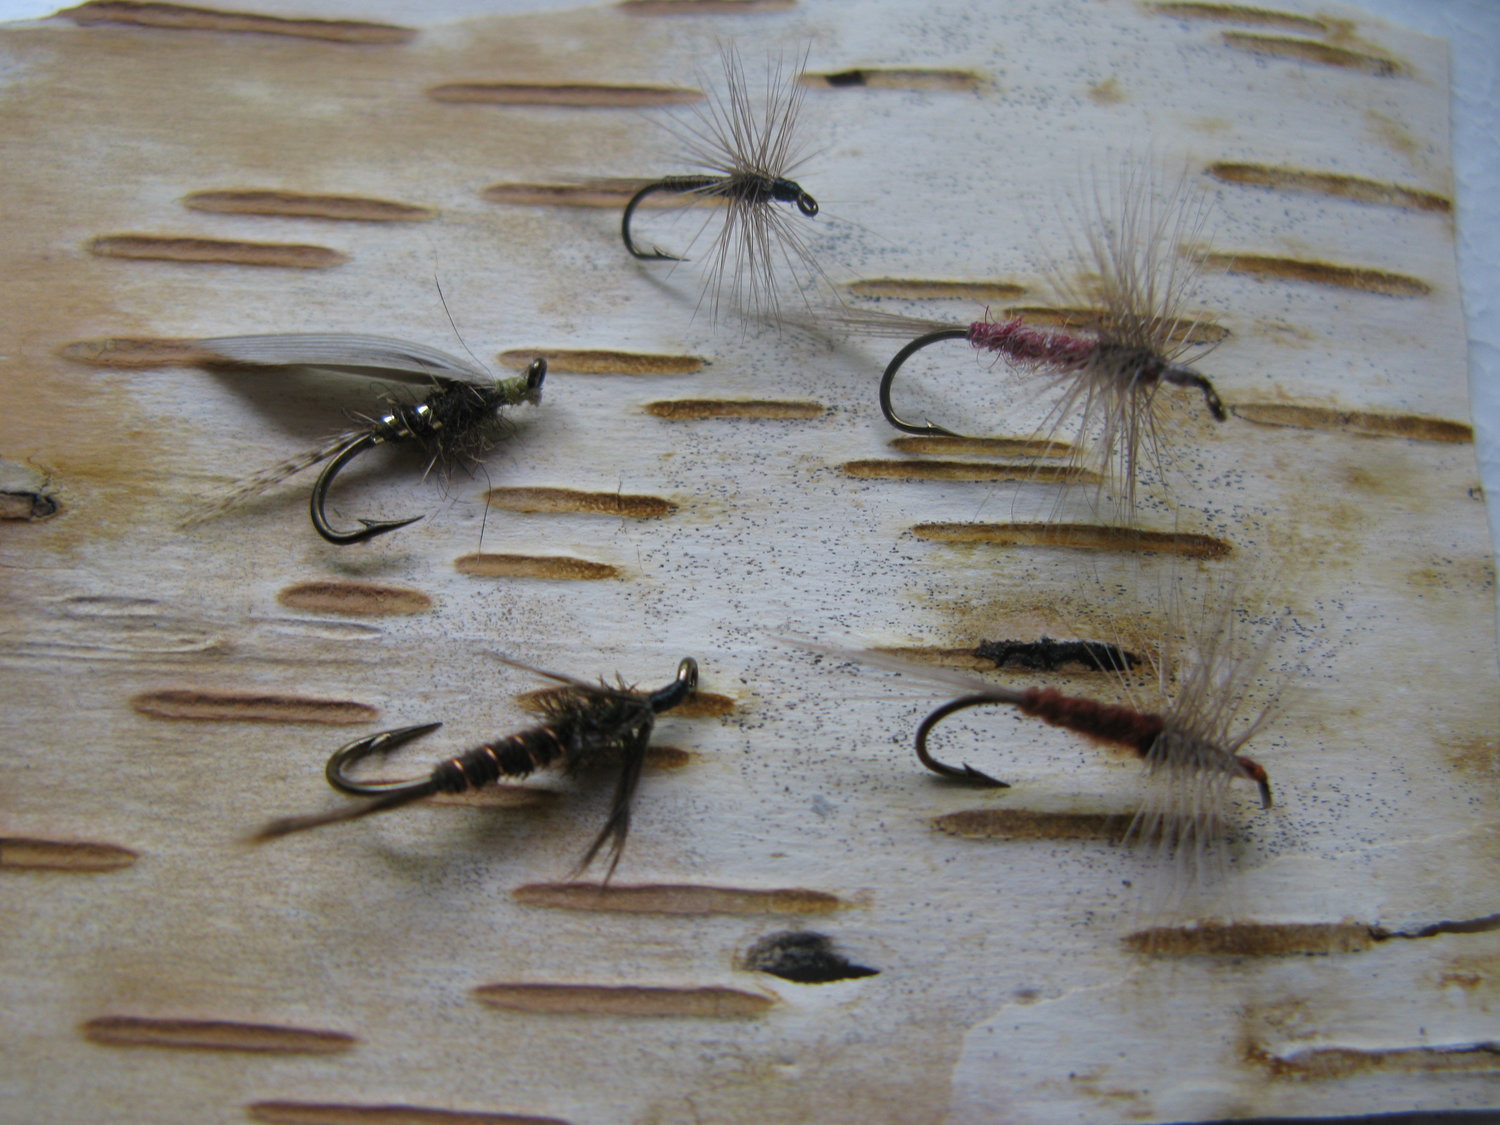 Pictured in clockwise order are a Pheasant Tail, bottom left, Hare’s Ear, Blue Quill, Hendrickson and Rusty Spinner fly patterns.